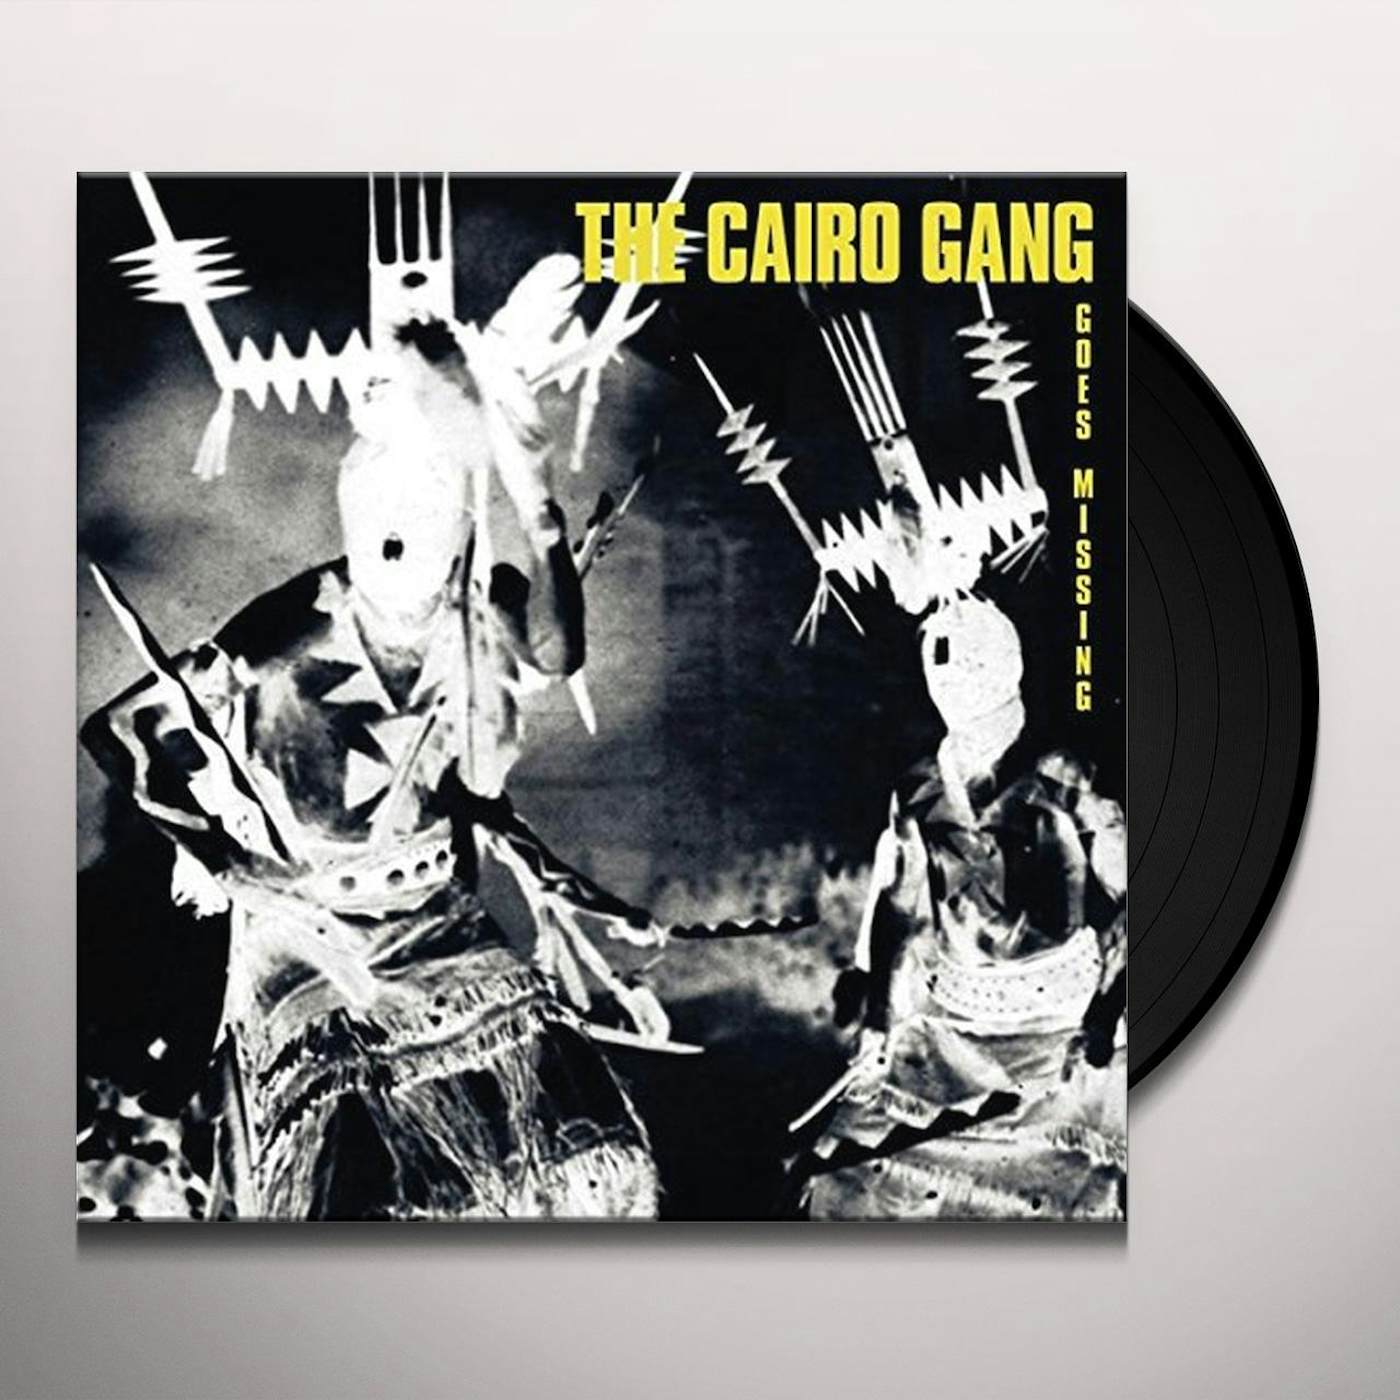 The Cairo Gang Goes Missing Vinyl Record